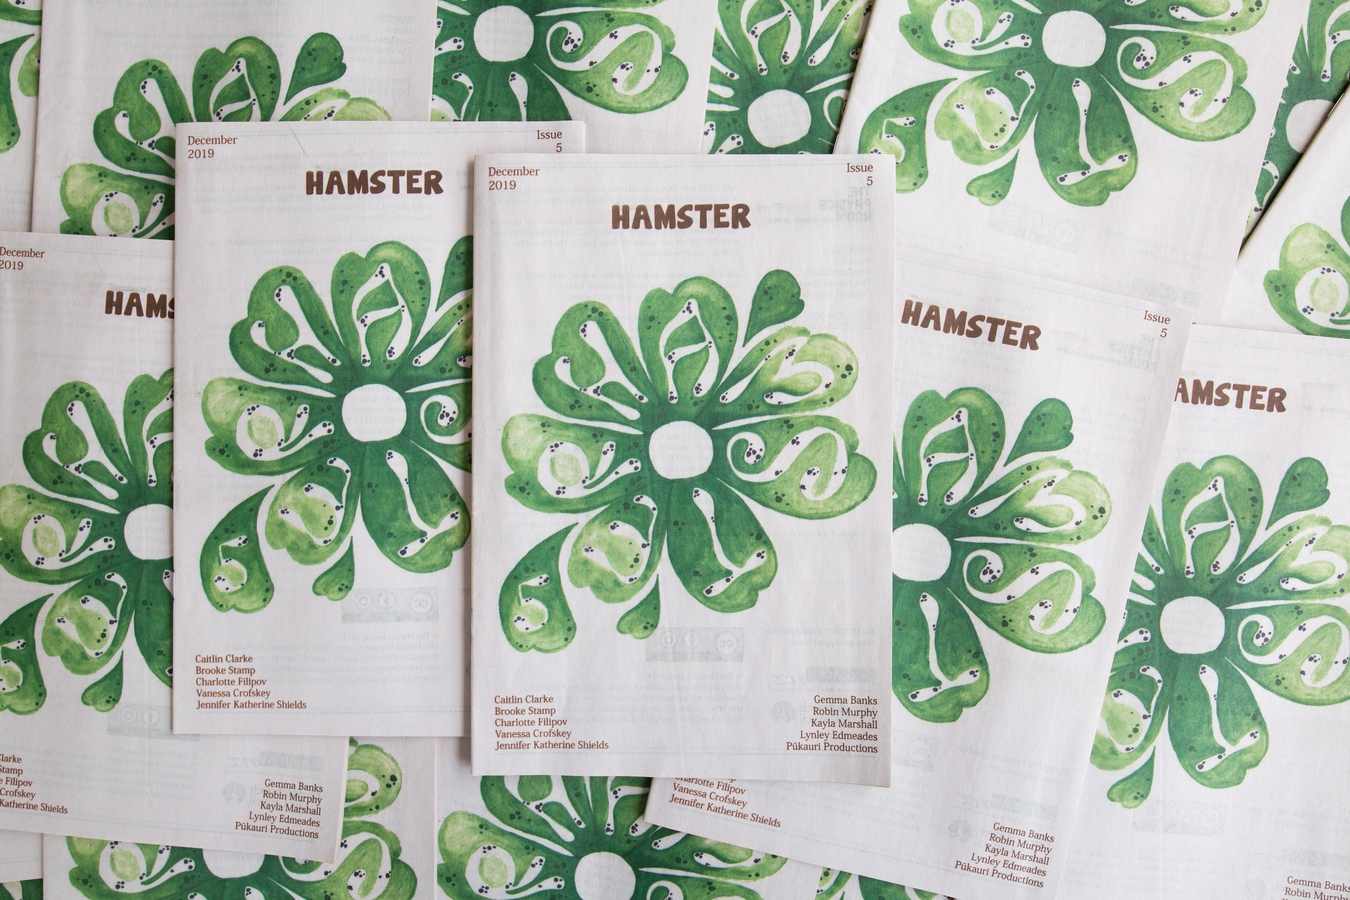 HAMSTER Magazine Issue 5, Cover Illustration by Caitlin Clarke.